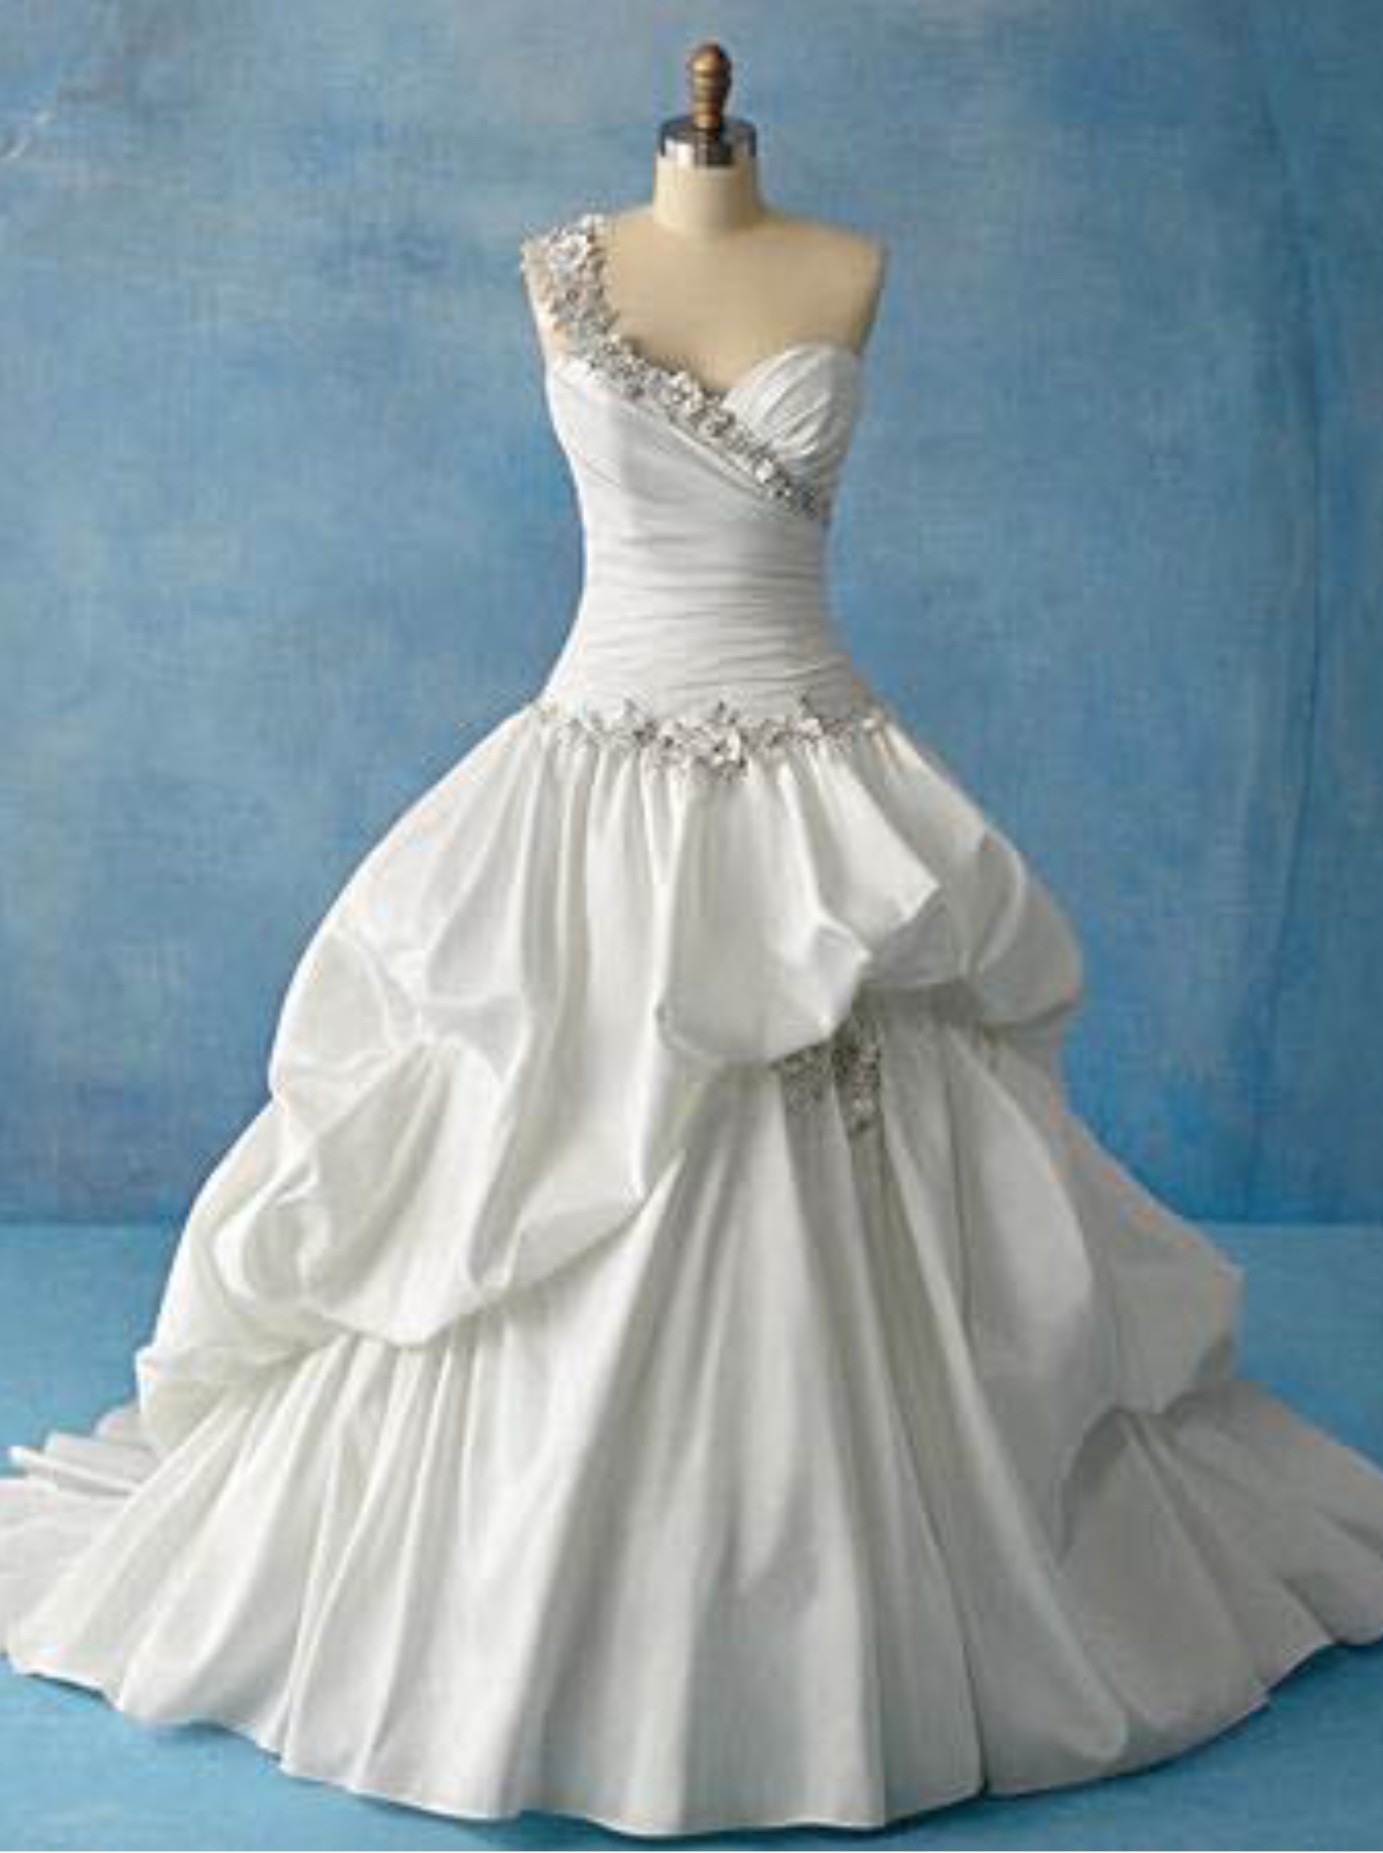  Alfred  Angelo  204 New Wedding  Dress  on Sale 71 Off 